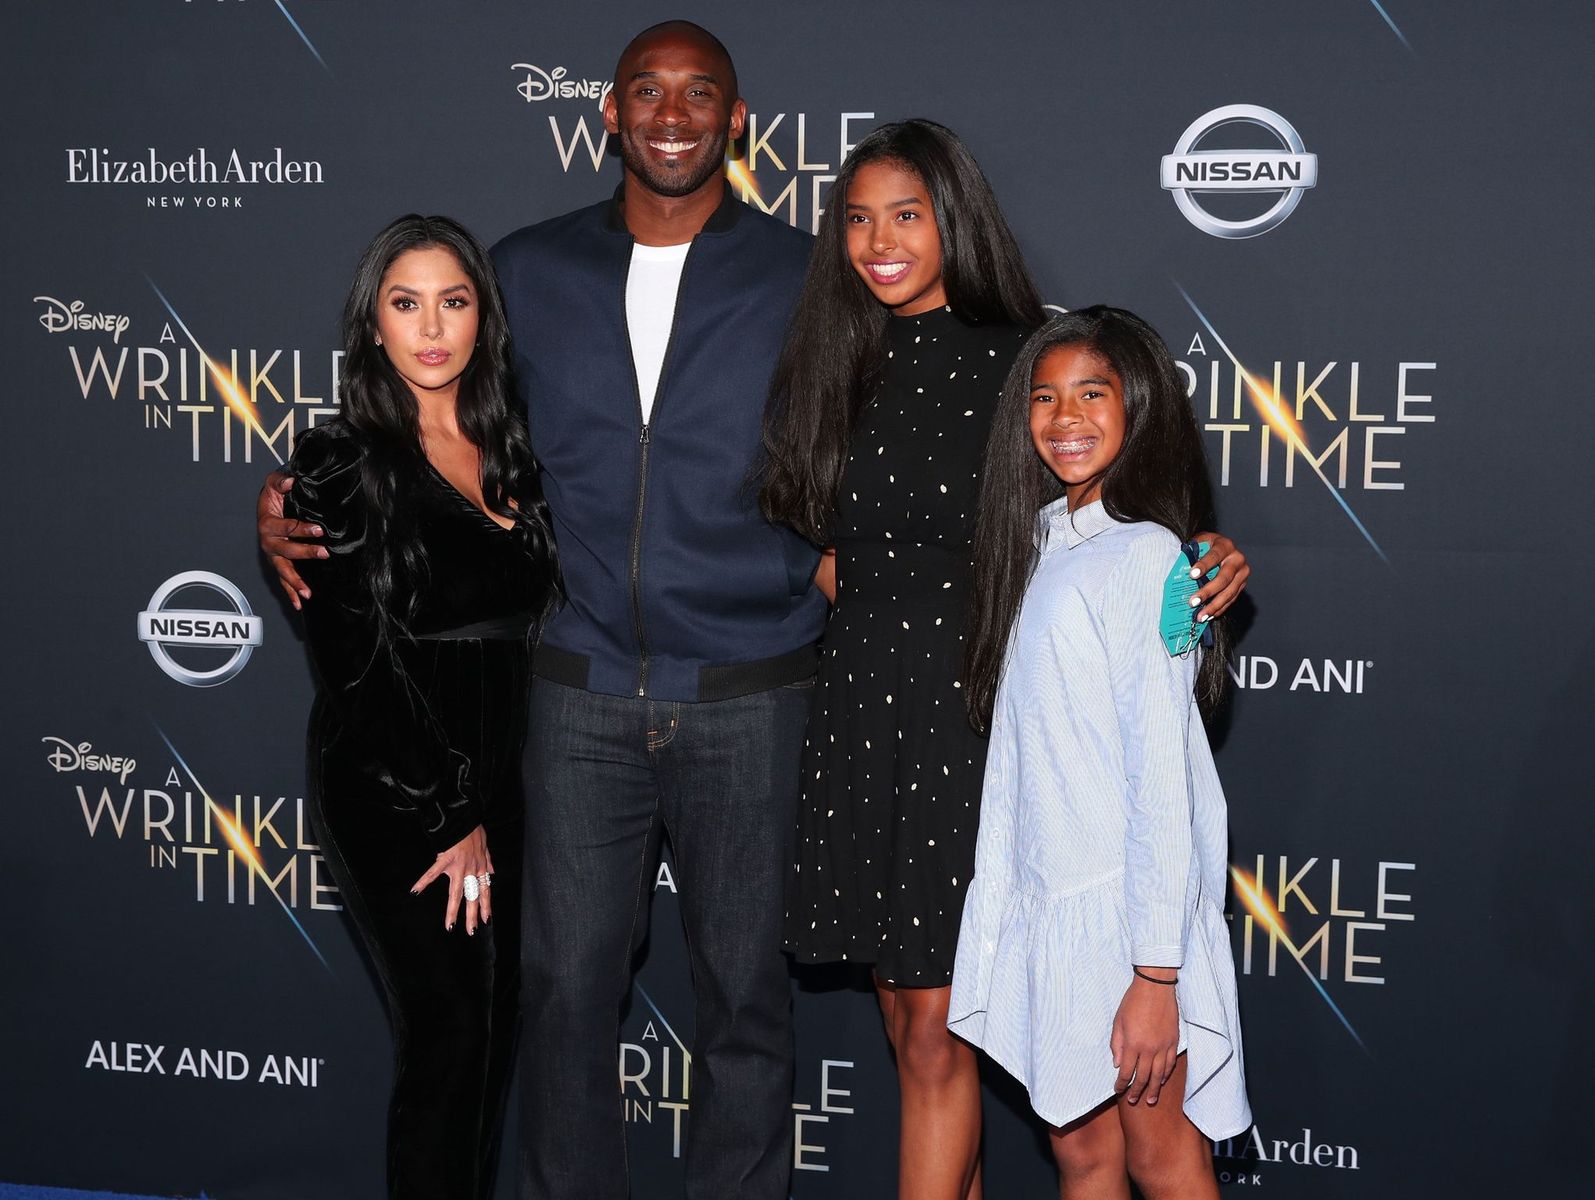 Vanessa and Kobe Bryant and their daughters, Natalia and Gianna, at the premiere of "A Wrinkle In Time" in Los Angeles on February 26, 2018. | Photo: Getty Images